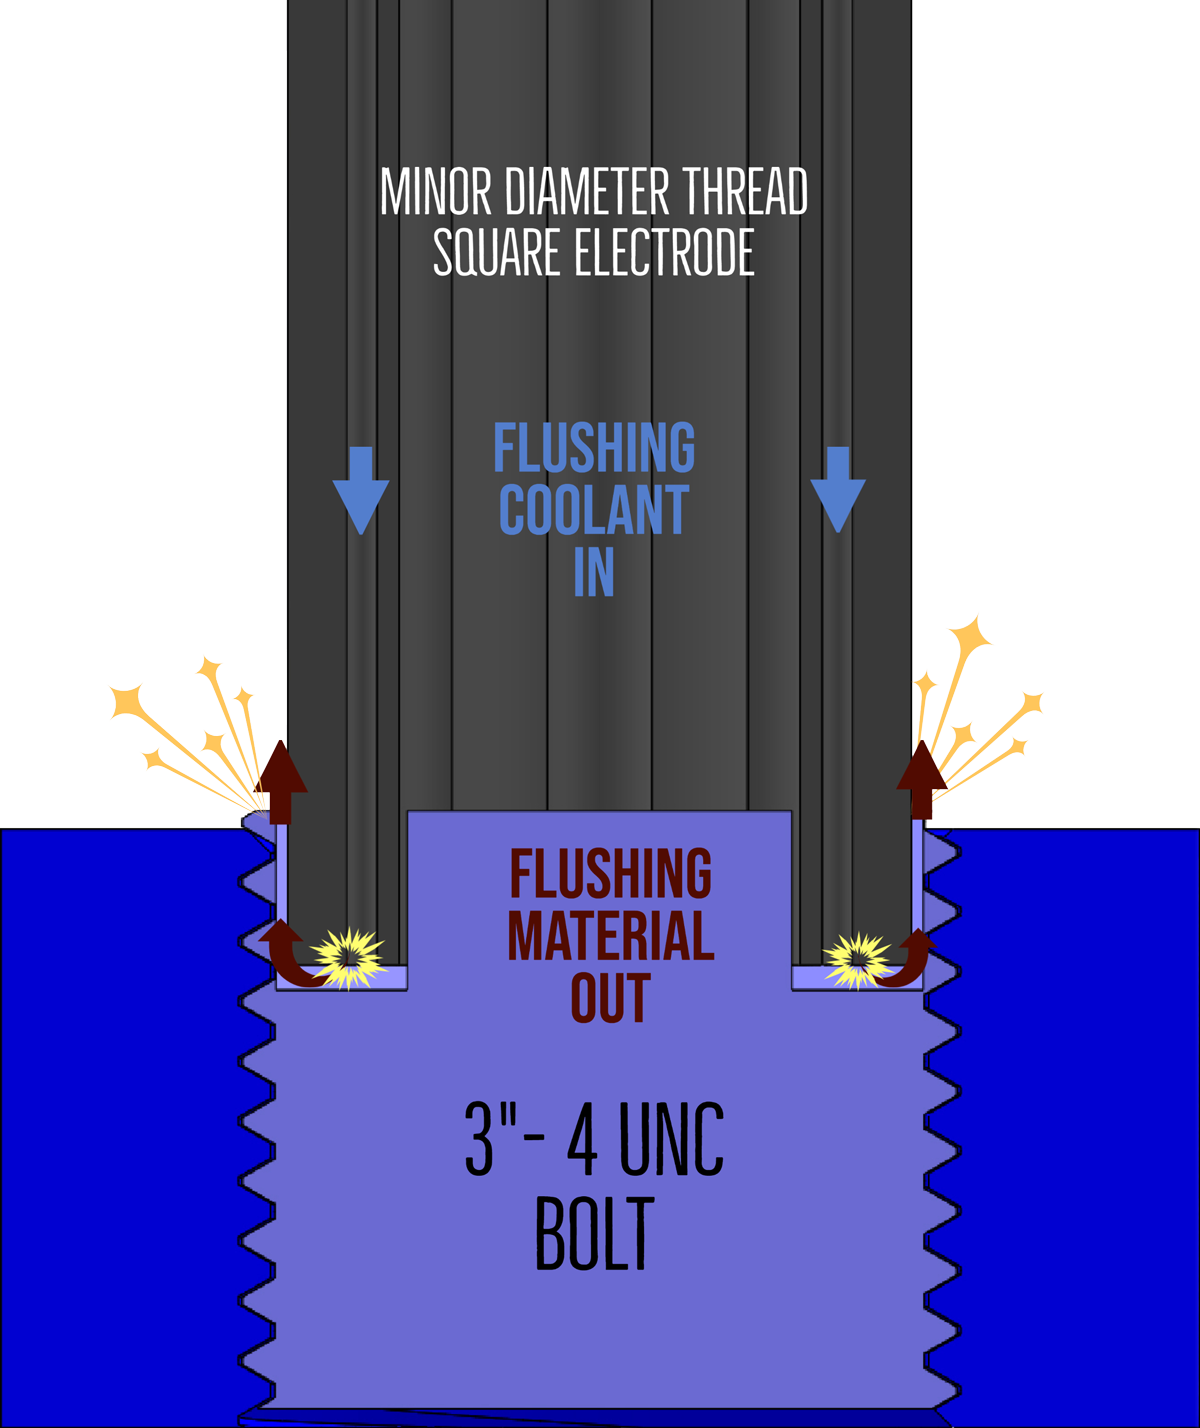 Illustration of metal disintegratoin on a 3"-4 UNC bolt. Minor diameter thread square electrode is placed over the bolt. Coolant is flushed in and the bolt material is flushed out.